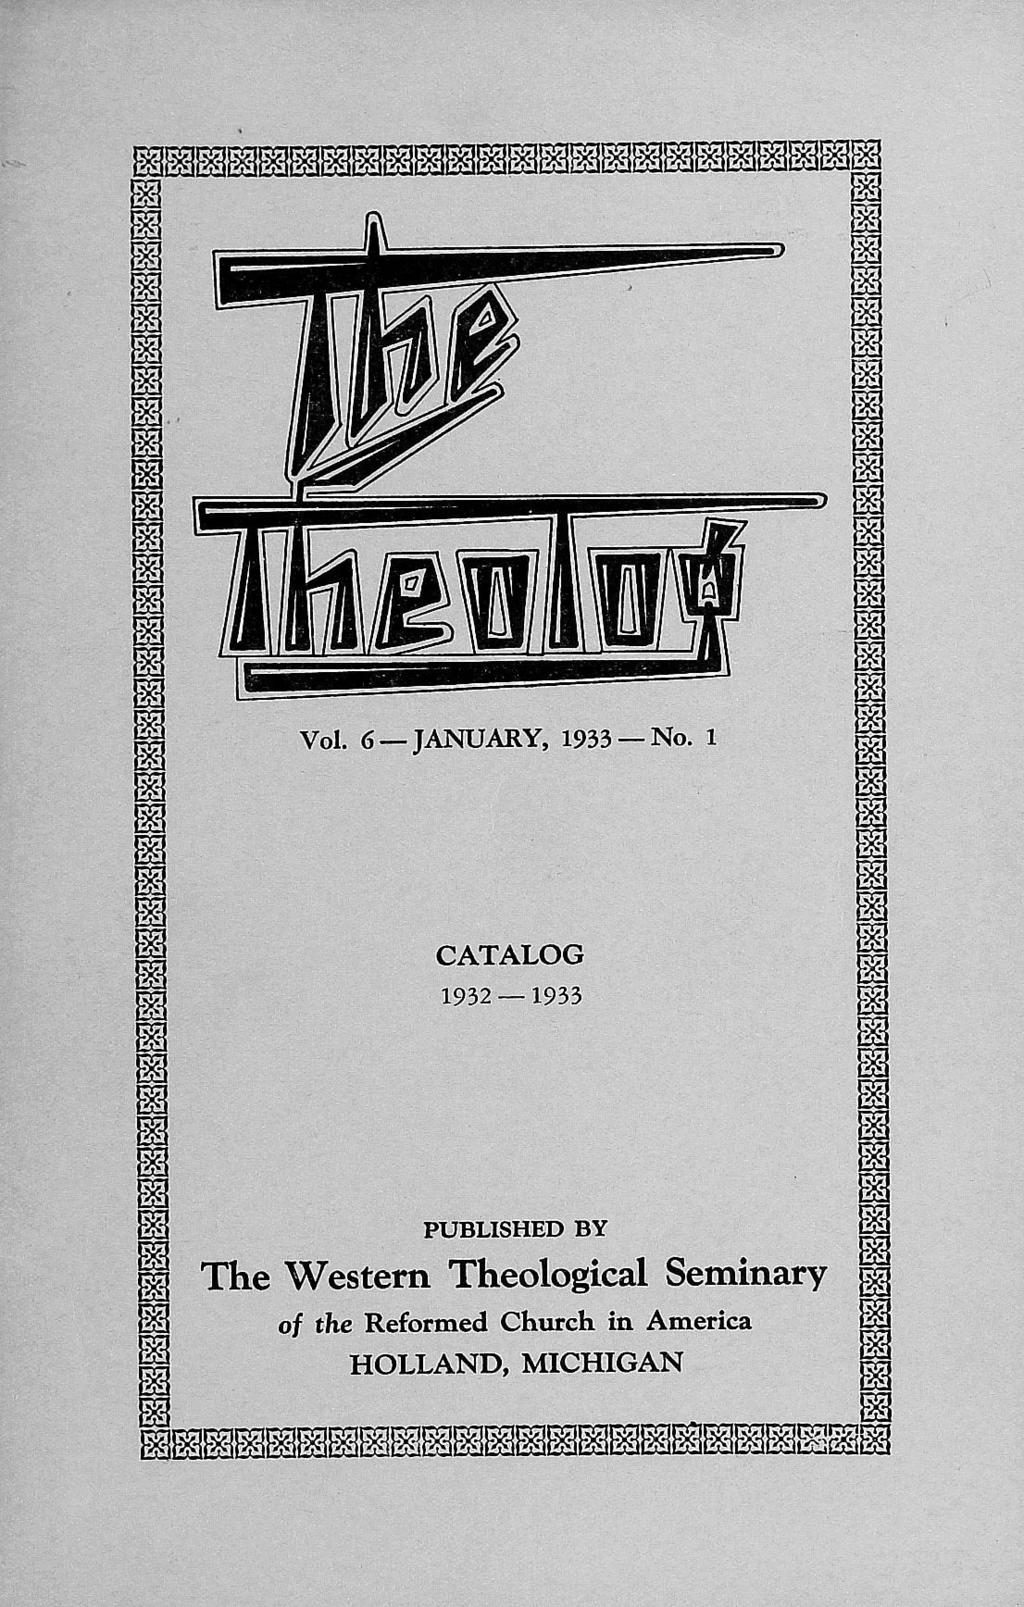 CATALOG 1932 1933 PUBLISHED BY The Western Theological